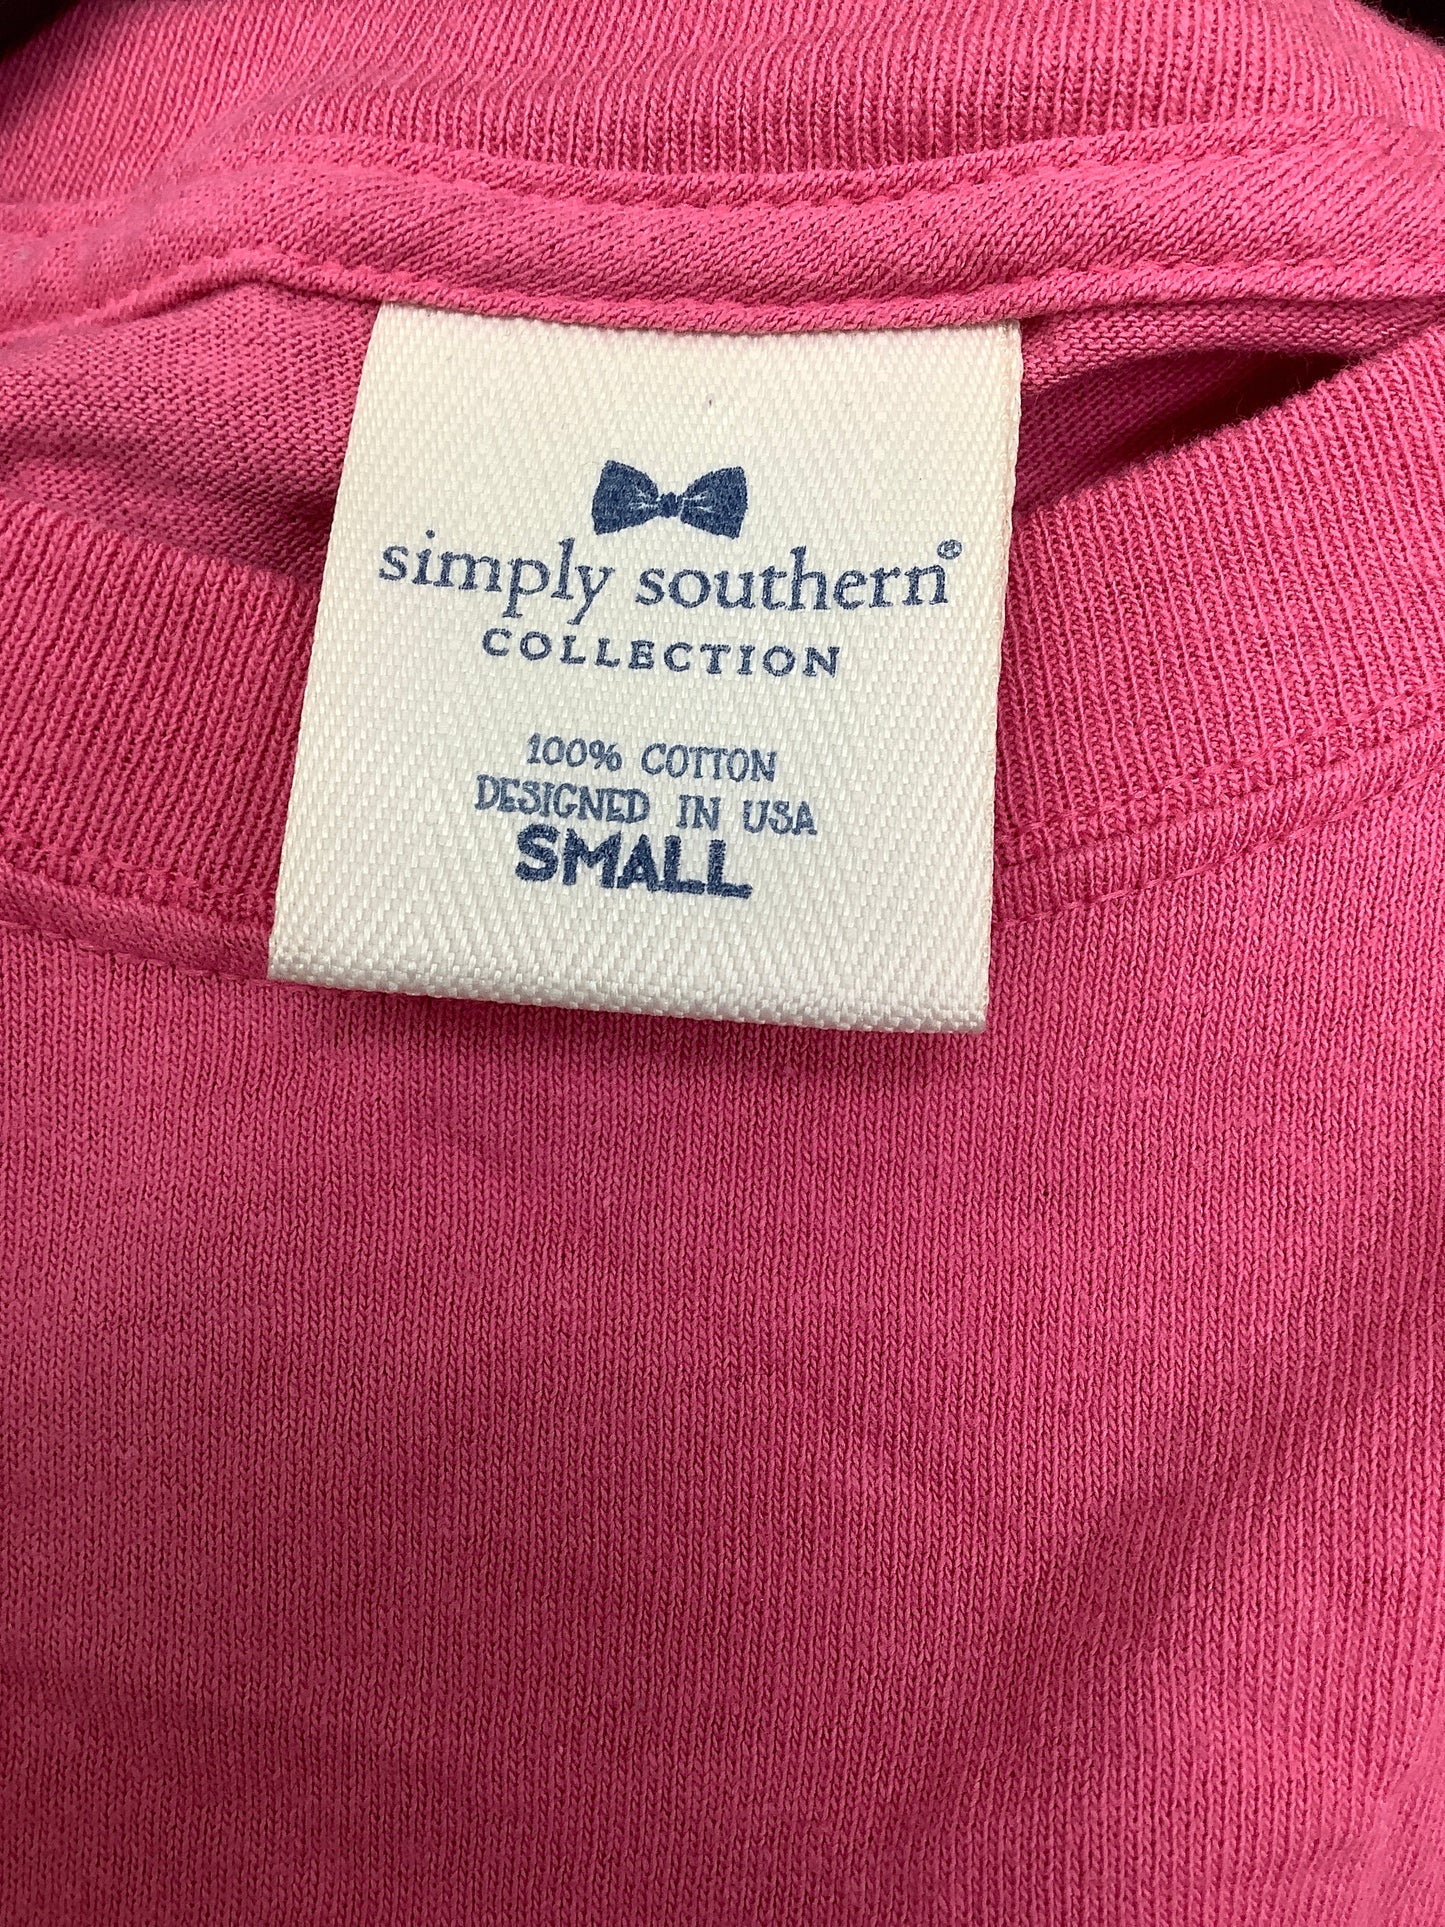 Pink Top Long Sleeve Simply Southern, Size S